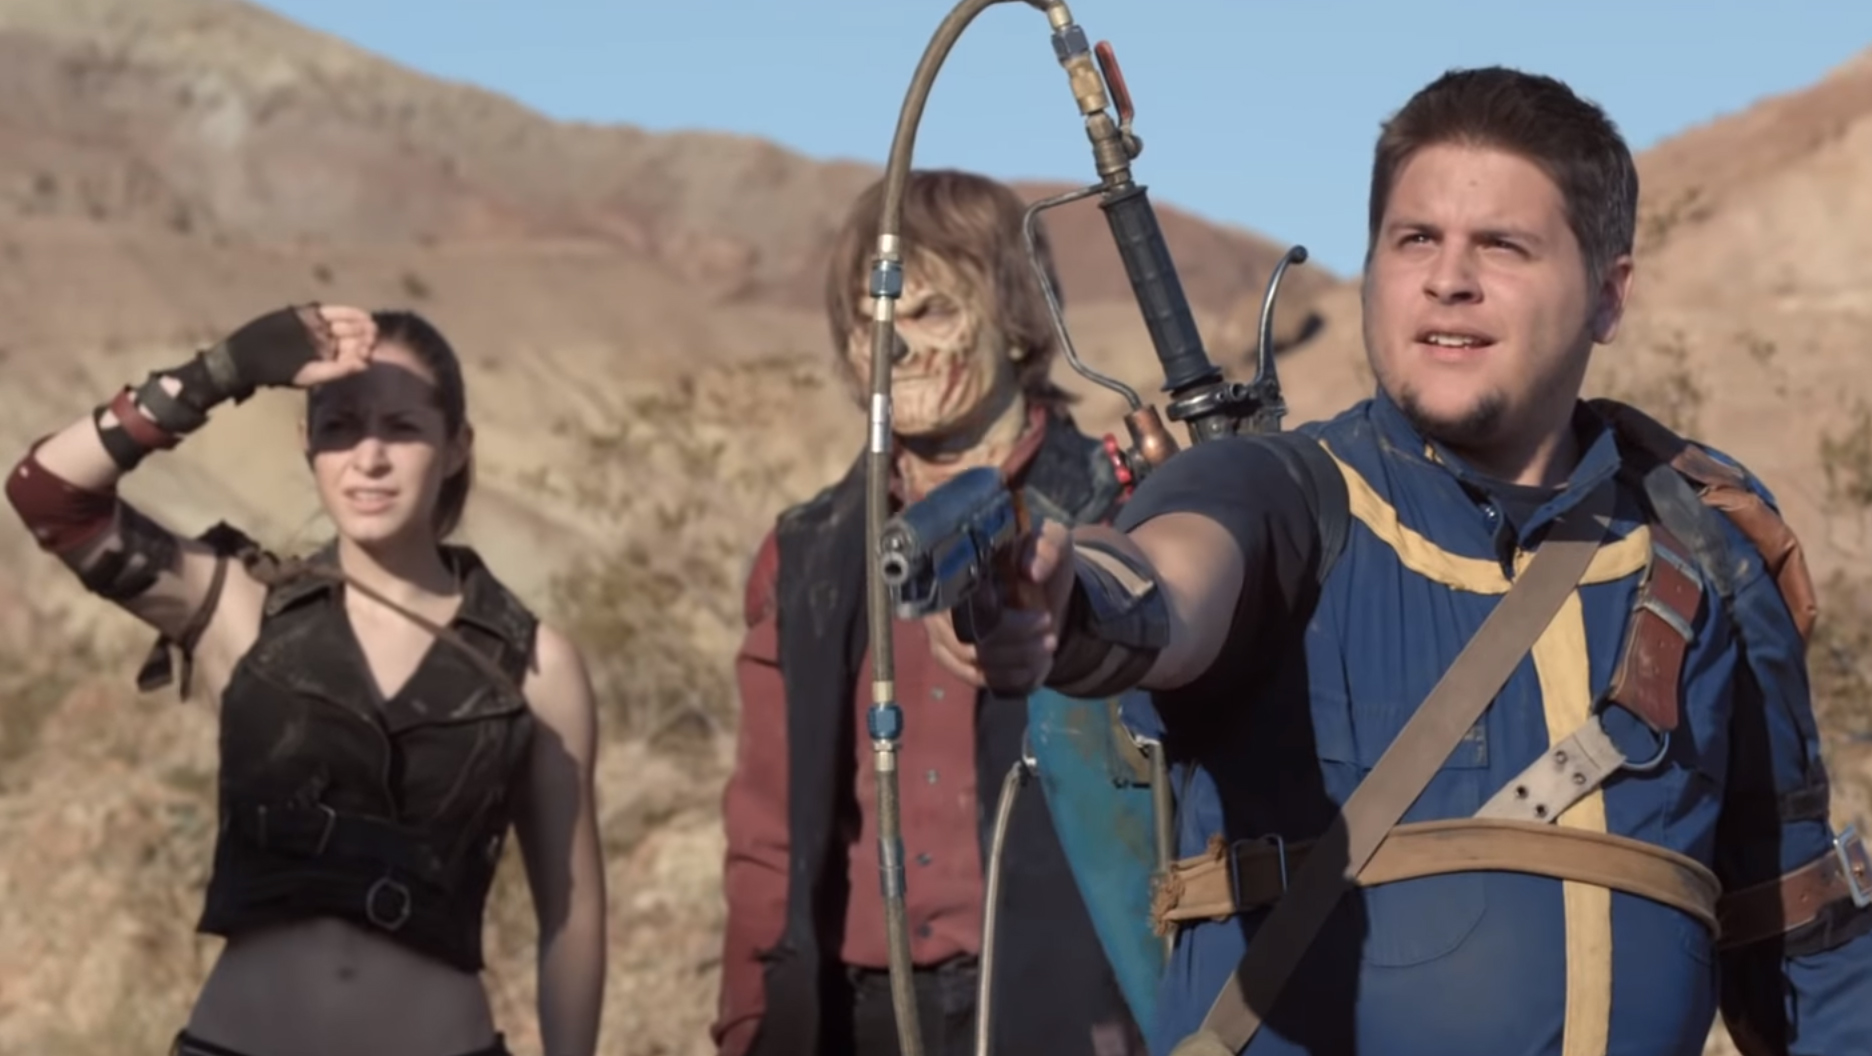  There's already a Fallout TV series, and it's pretty good 